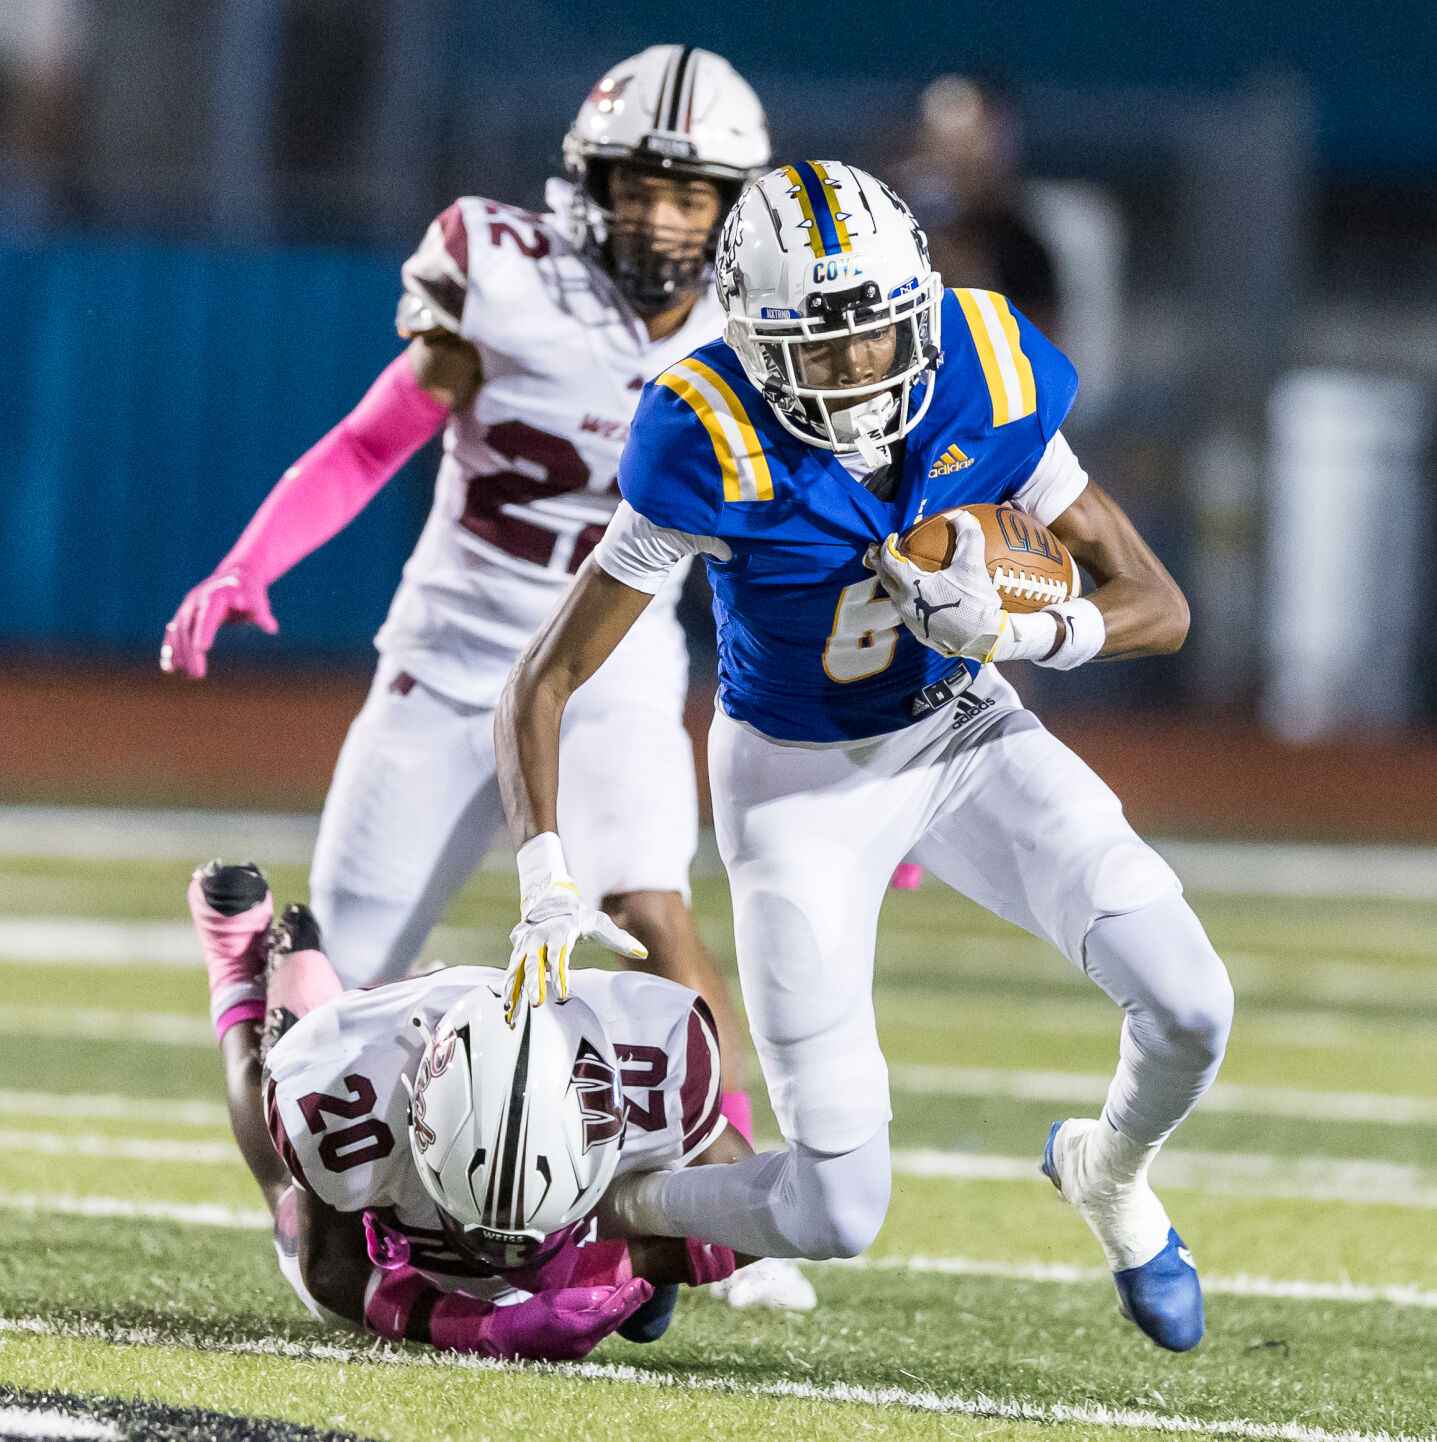 Copperas Cove Bulldawgs Suffer 49-7 Loss to Pflugerville Weiss Wolves: Unable to Match Speed and Efficiency